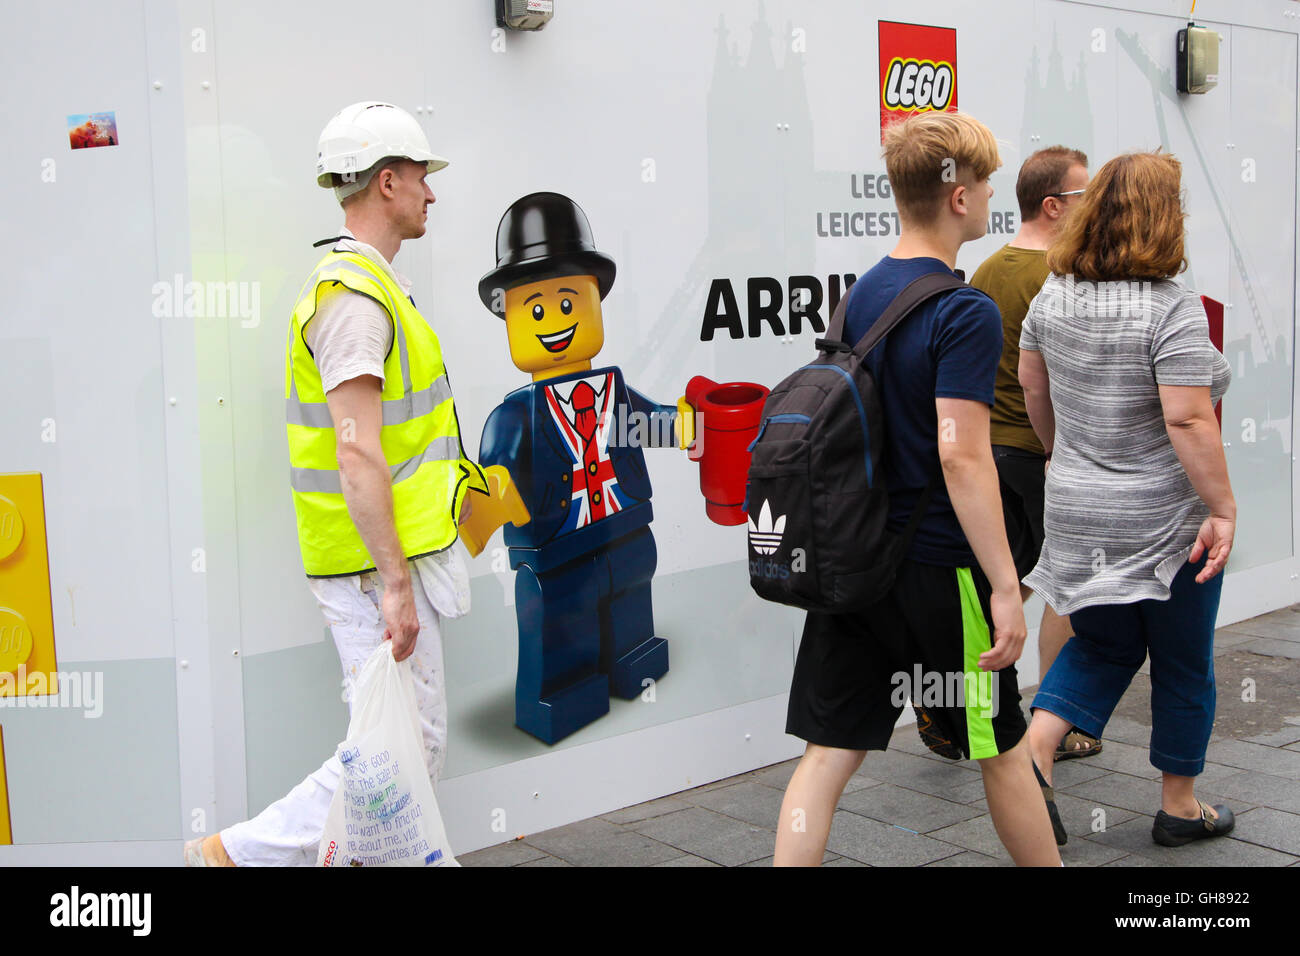 Leicester Square, London, UK. 9th Aug, 2016. New LEGO store under construction and due to open soon in Leicester Square, London. Credit:  Dinendra Haria/Alamy Live News Stock Photo